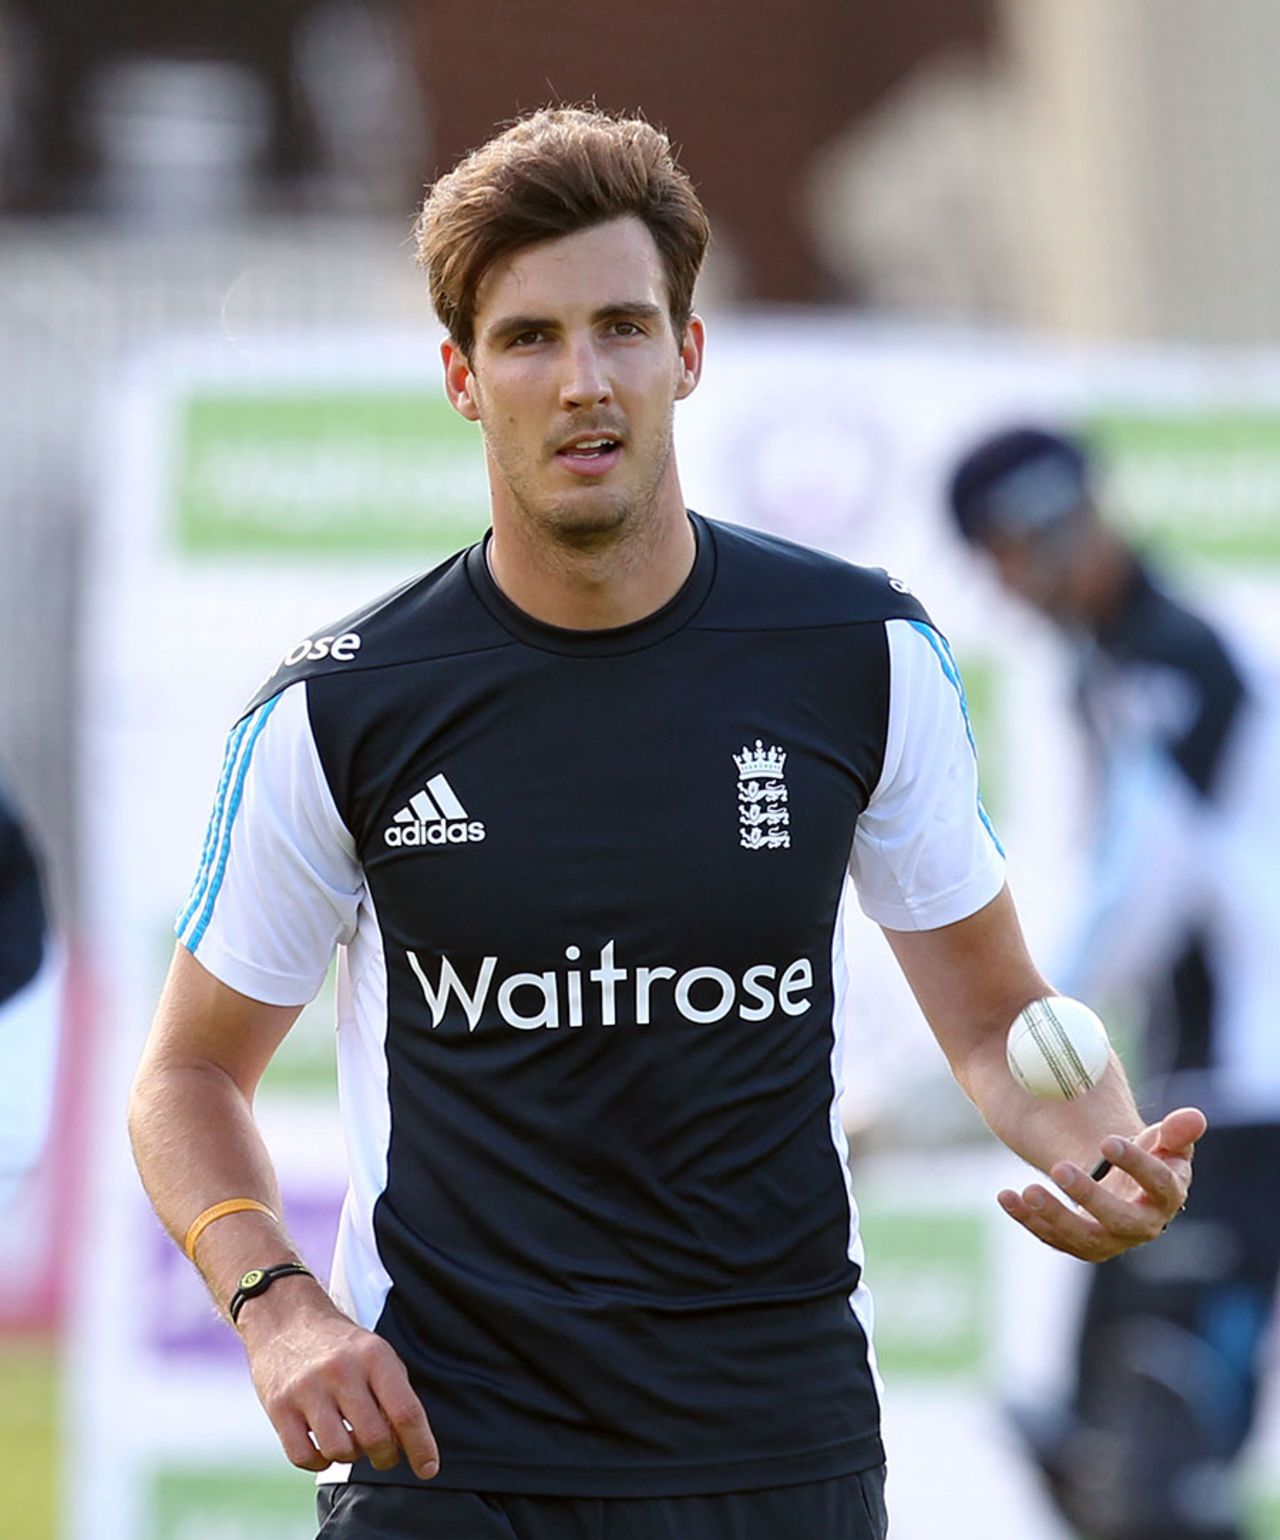 Steven Finn is an option for England to turn to in the 3rd ODI, Trent Bridge, August 29, 2014